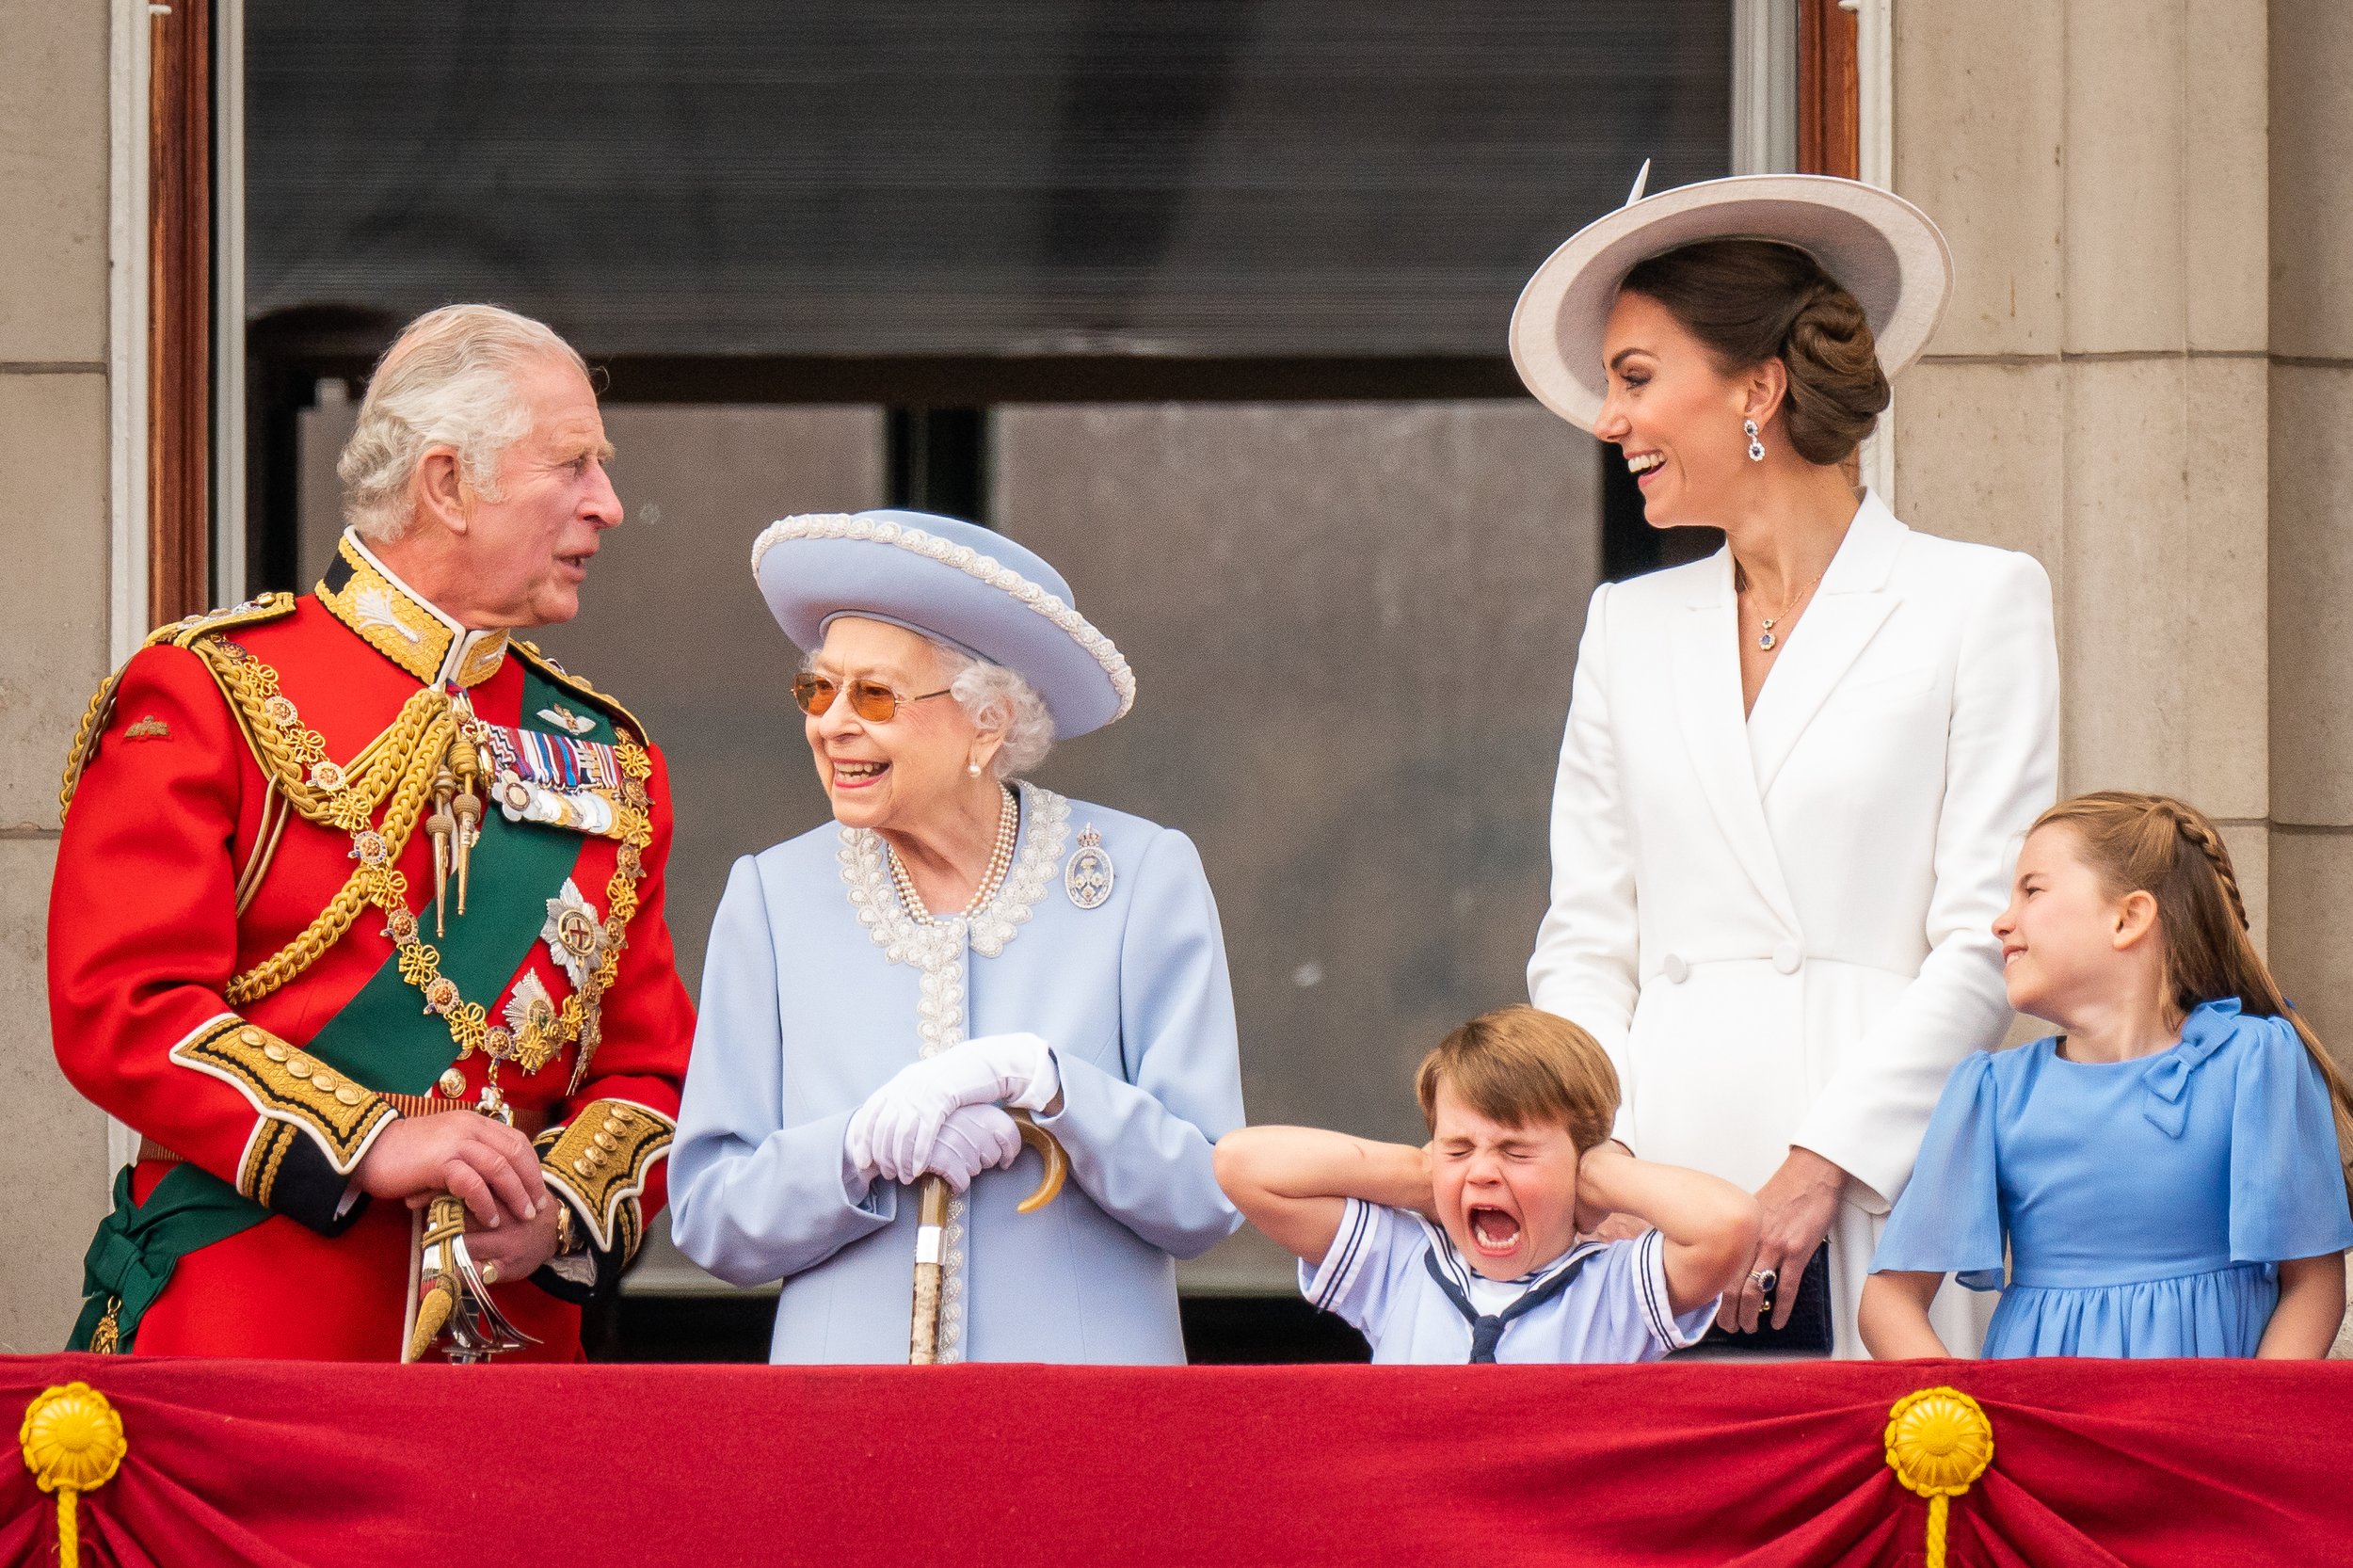  The Prince of Wales, Queen Elizabeth II, Prince Louis, the Duchess of Cambridge and Princess Charlotte on the balcony of Buckingham Palace after the Trooping the Colour ceremony at Horse Guards Parade, central London, as the Queen celebrates her off